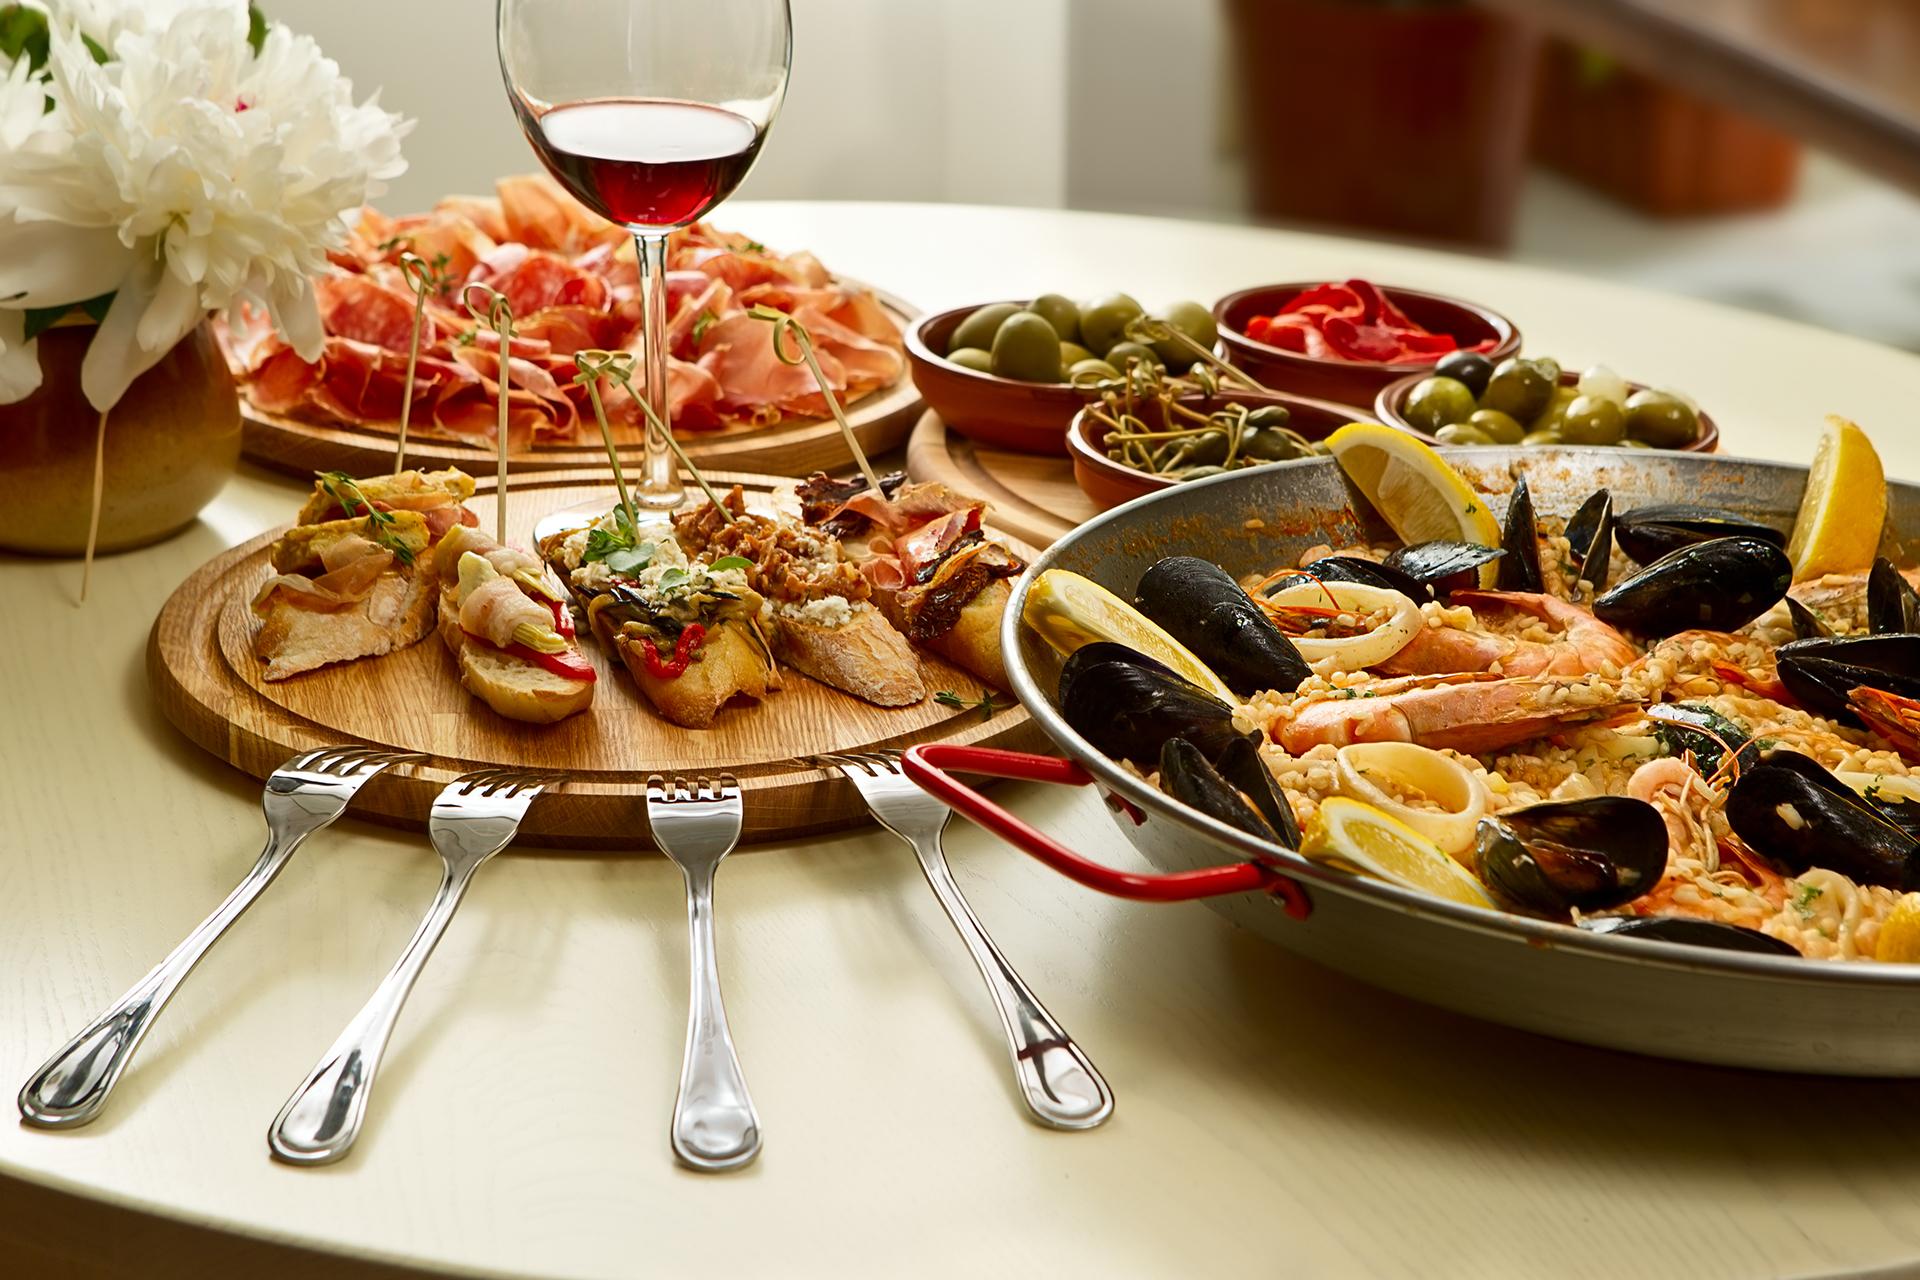 Top 10: Tapas to Try in Spain